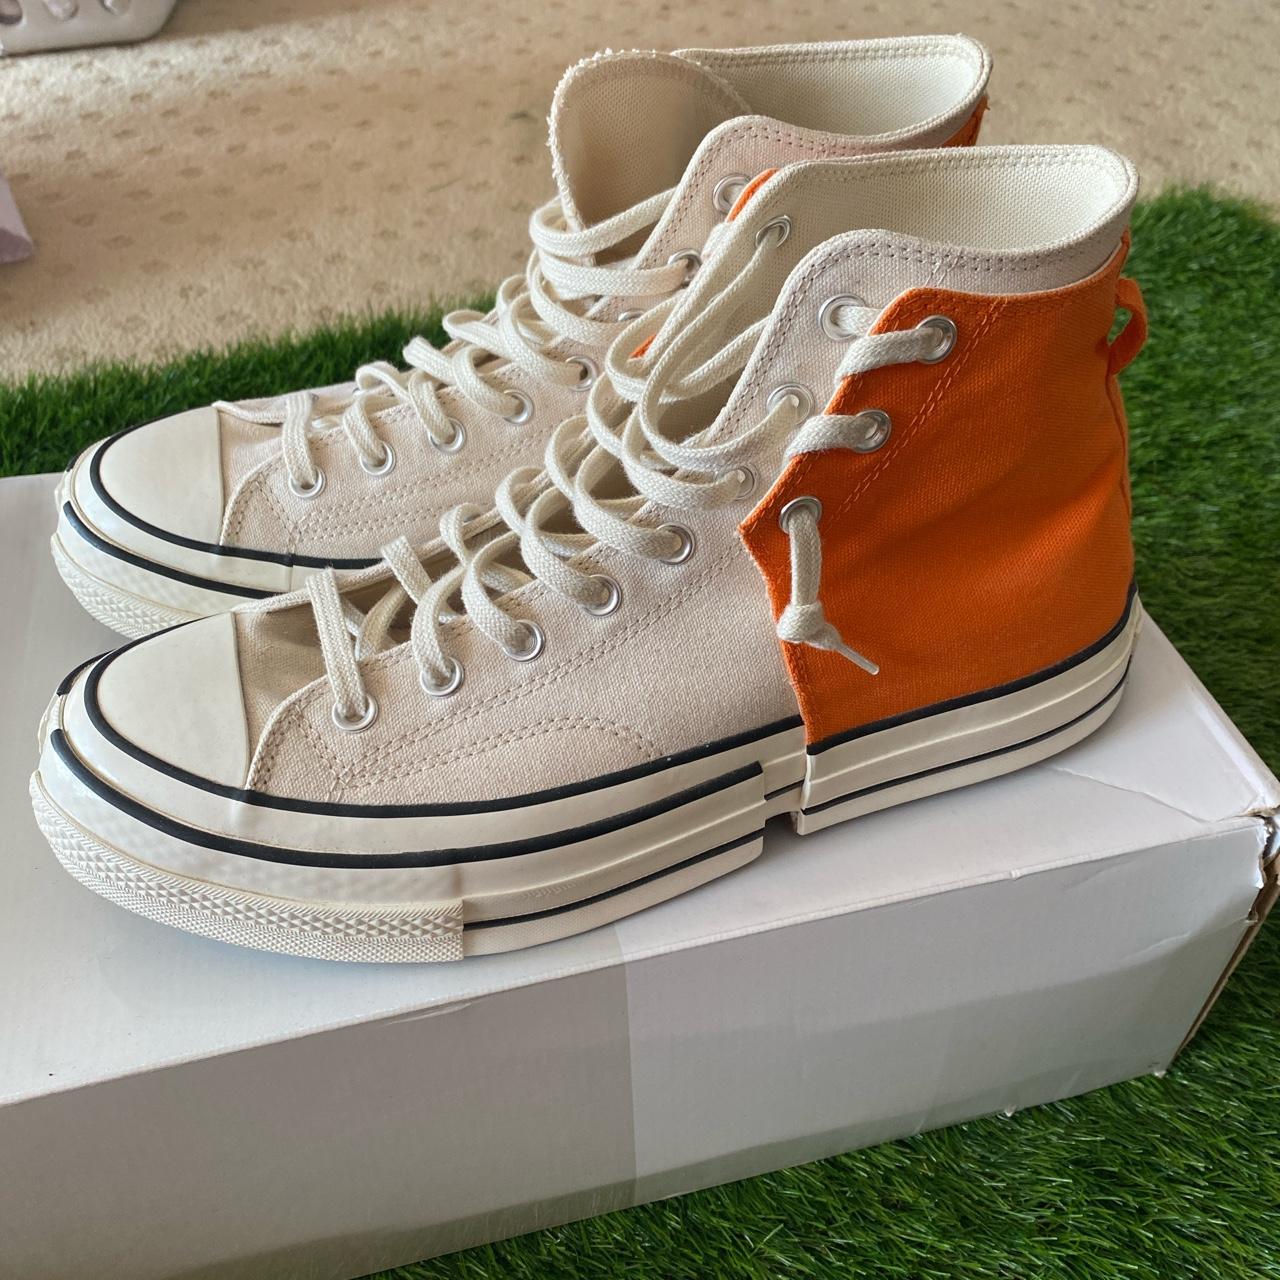 Feng Chen Wang Men's Cream and Orange Trainers